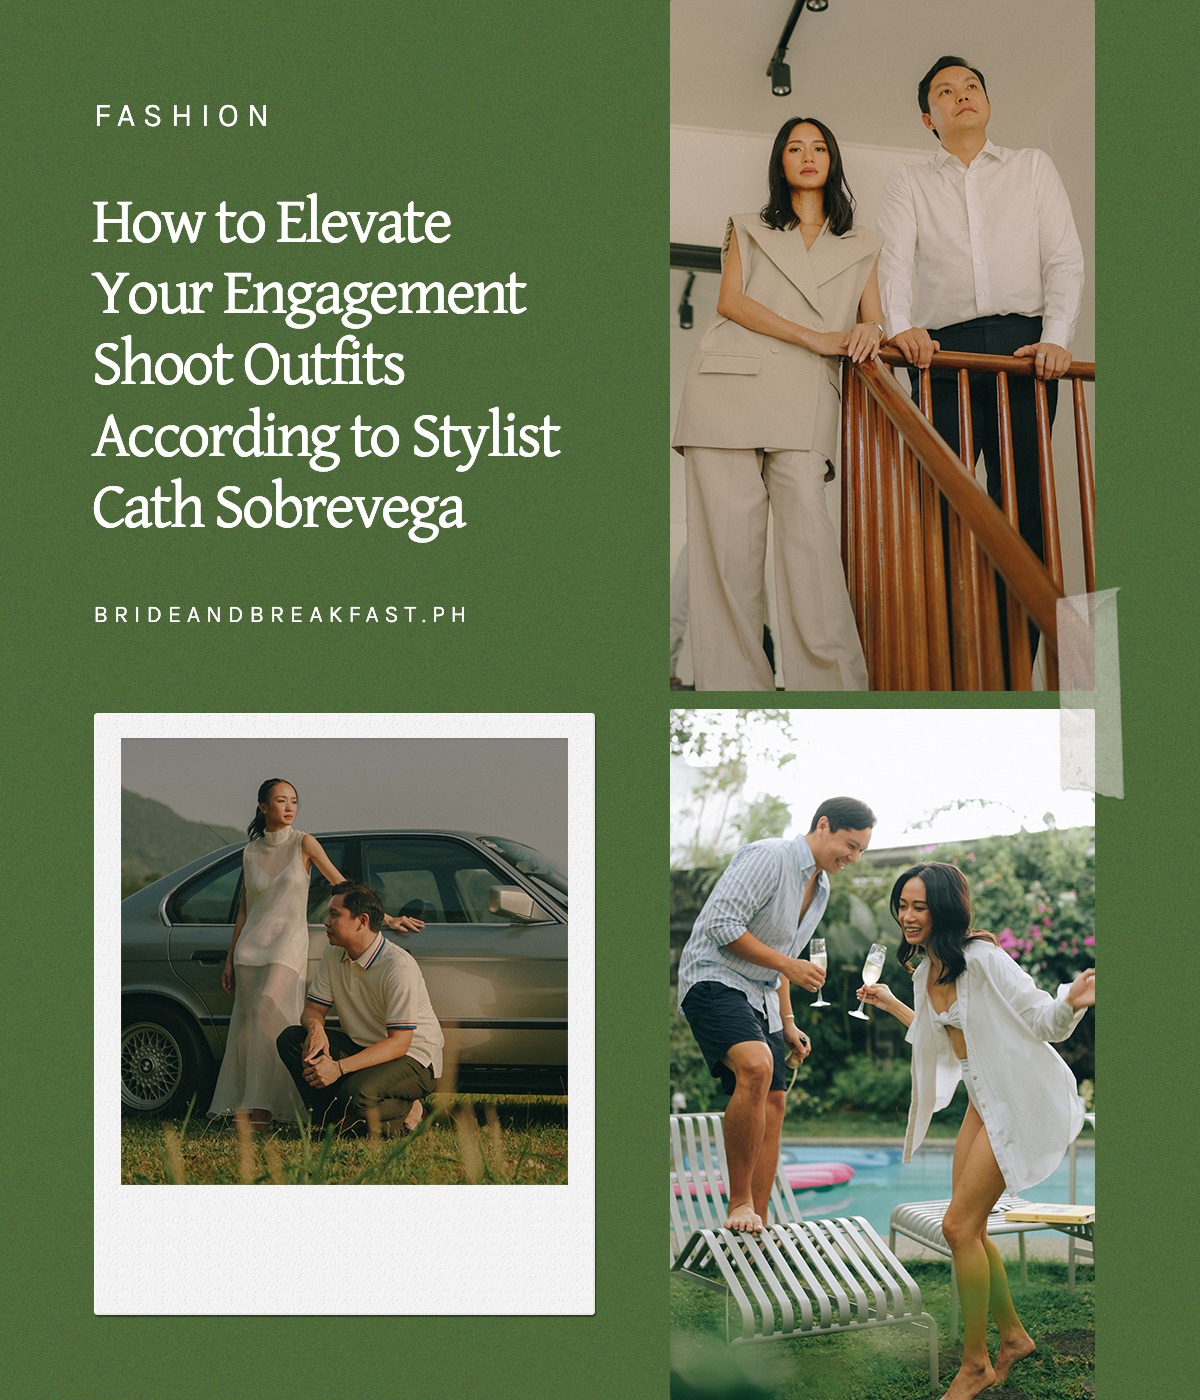 How to Elevate Your Engagement Shoot Outfits According to Stylist Cath Sobrevega